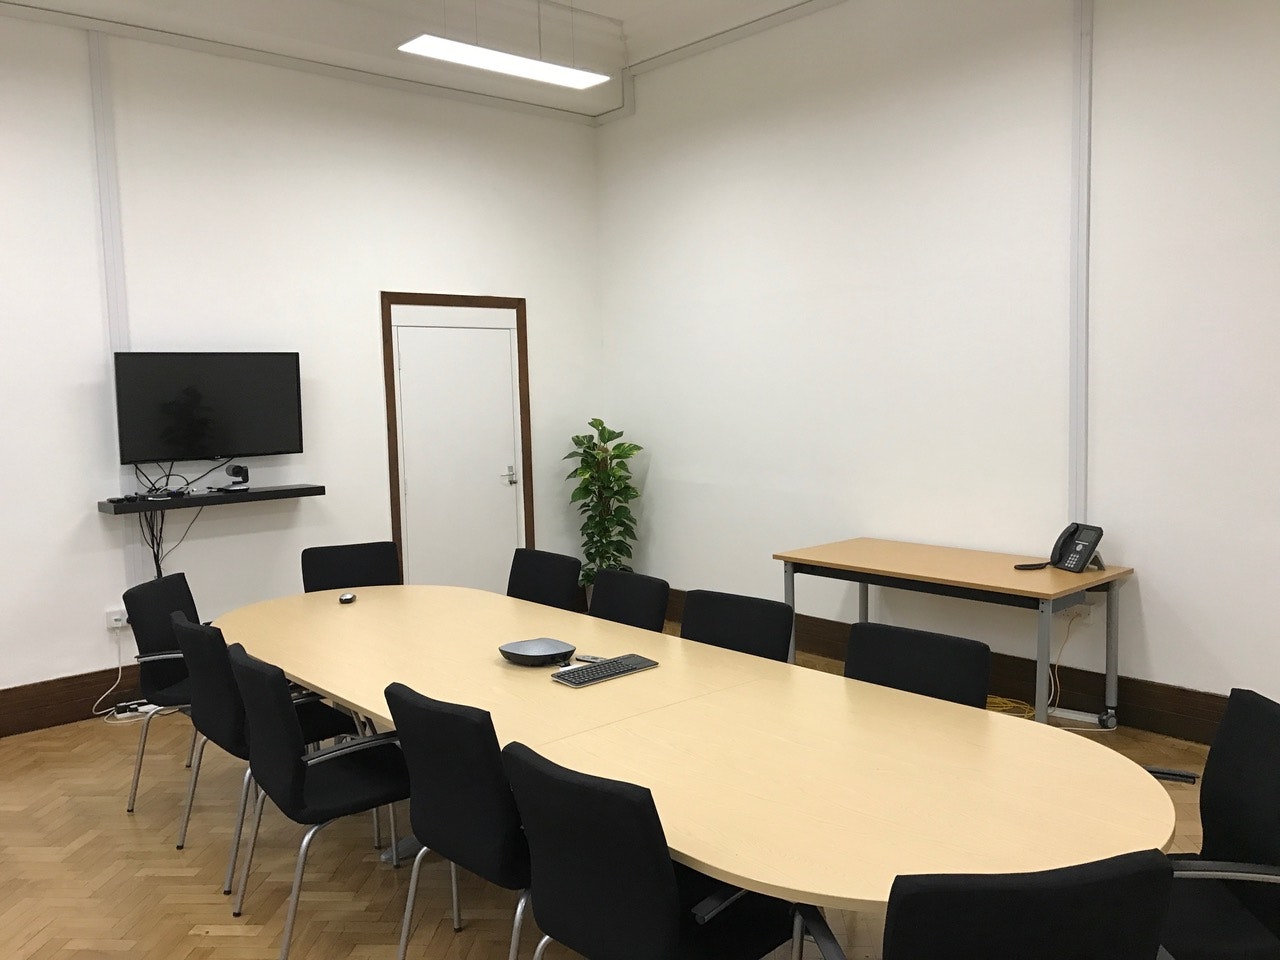 Meeting Rooms Venues in Salford - Holyoake House